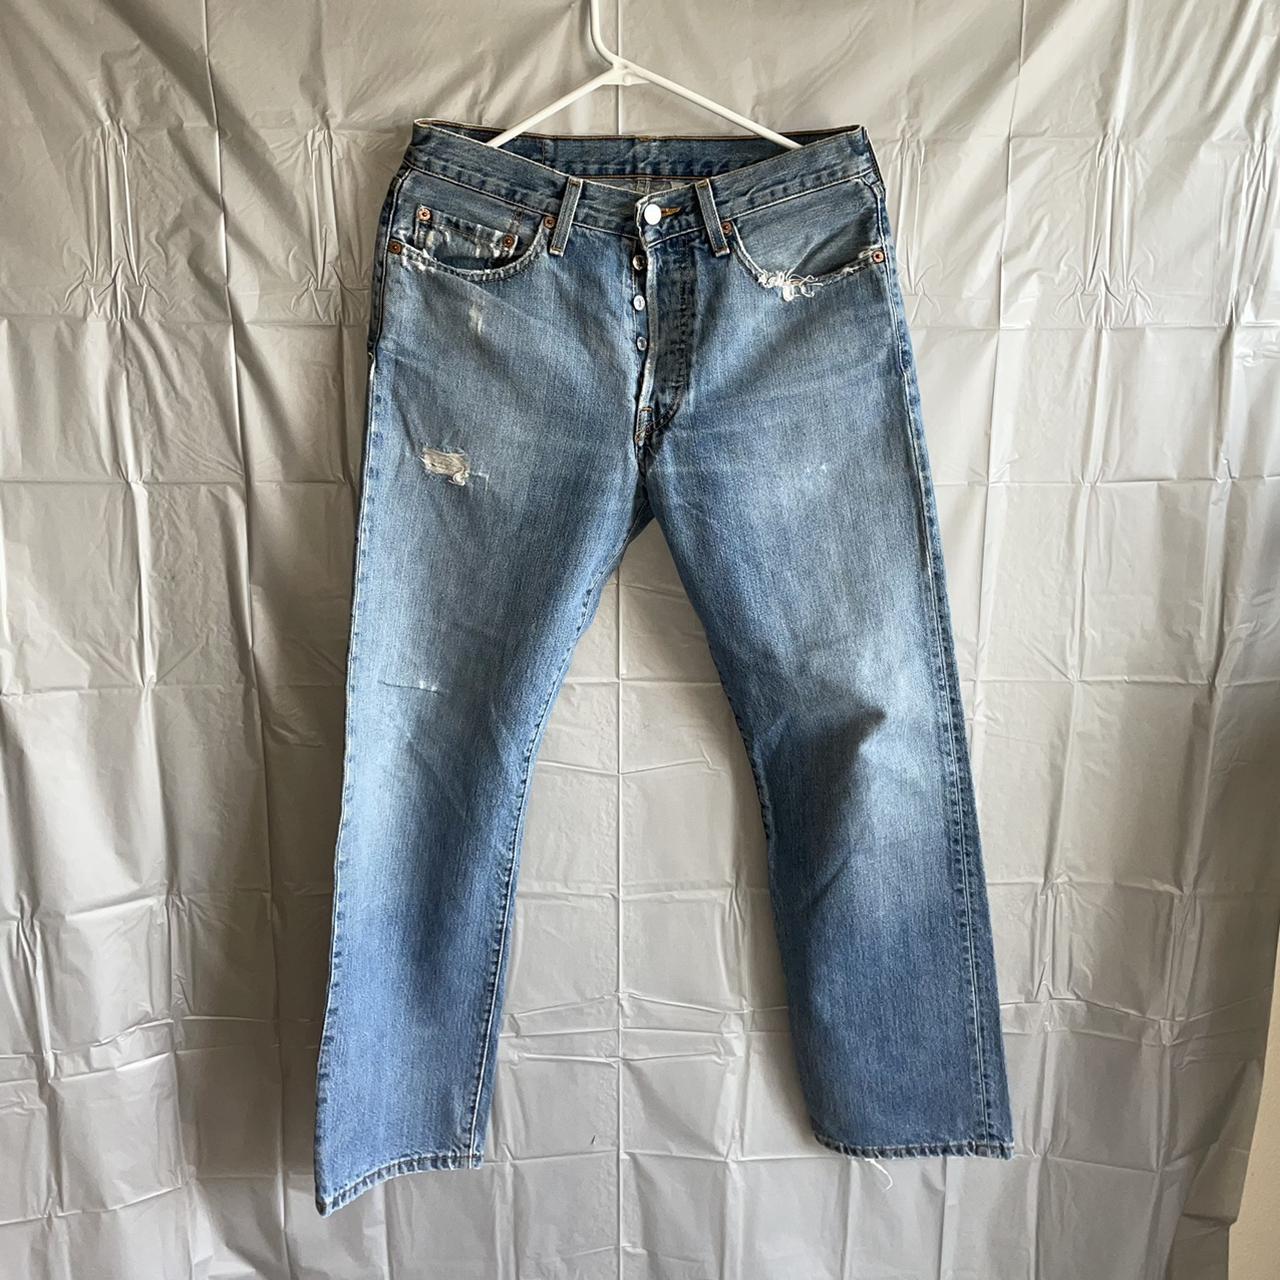 Levi's Women's Blue and Silver Jeans (3)